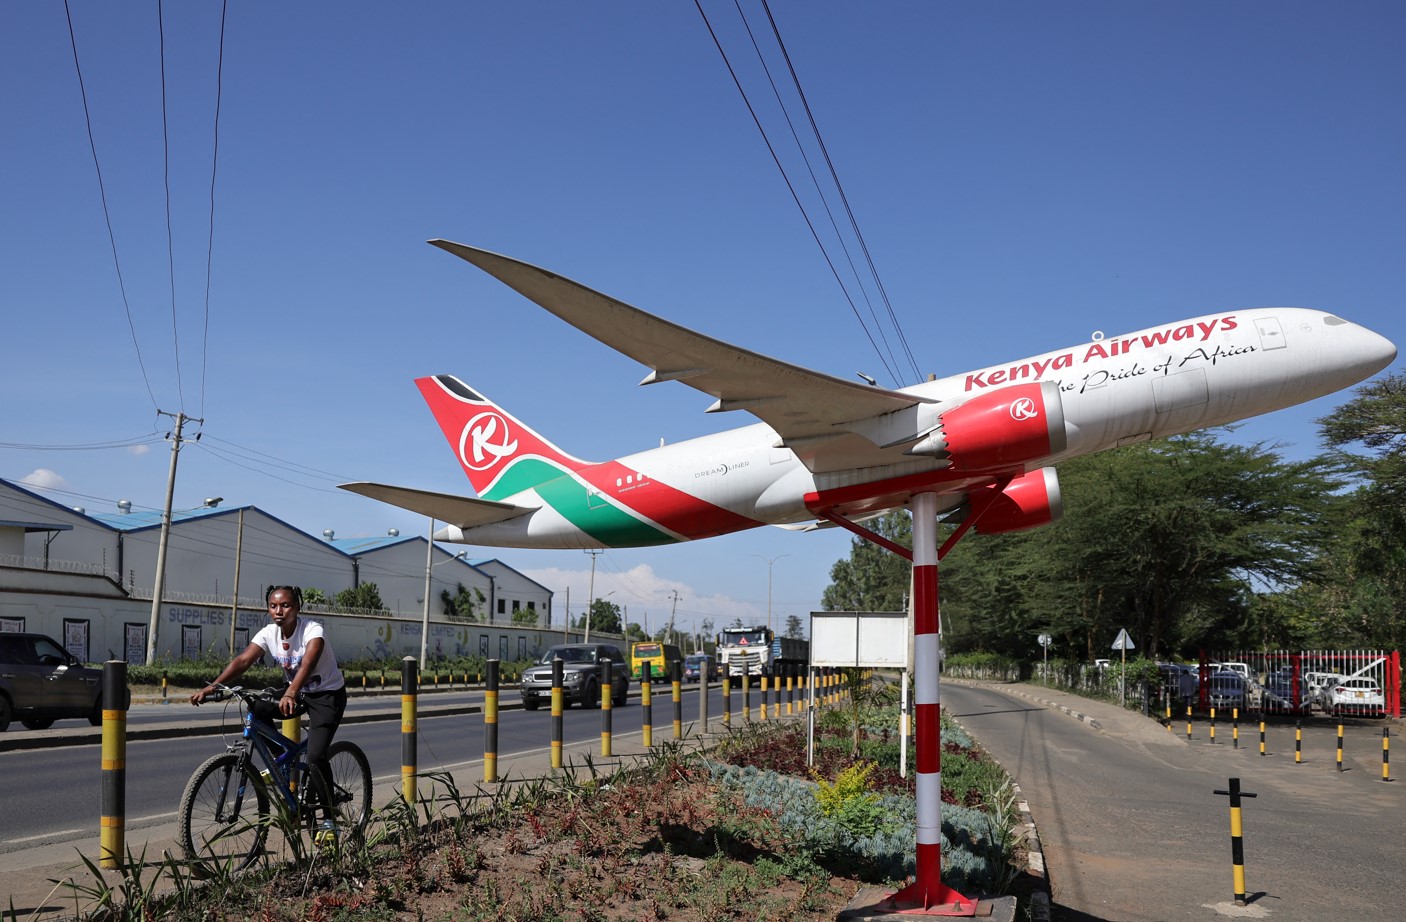 African airlines mark 4th consecutive year of no fatal accidents